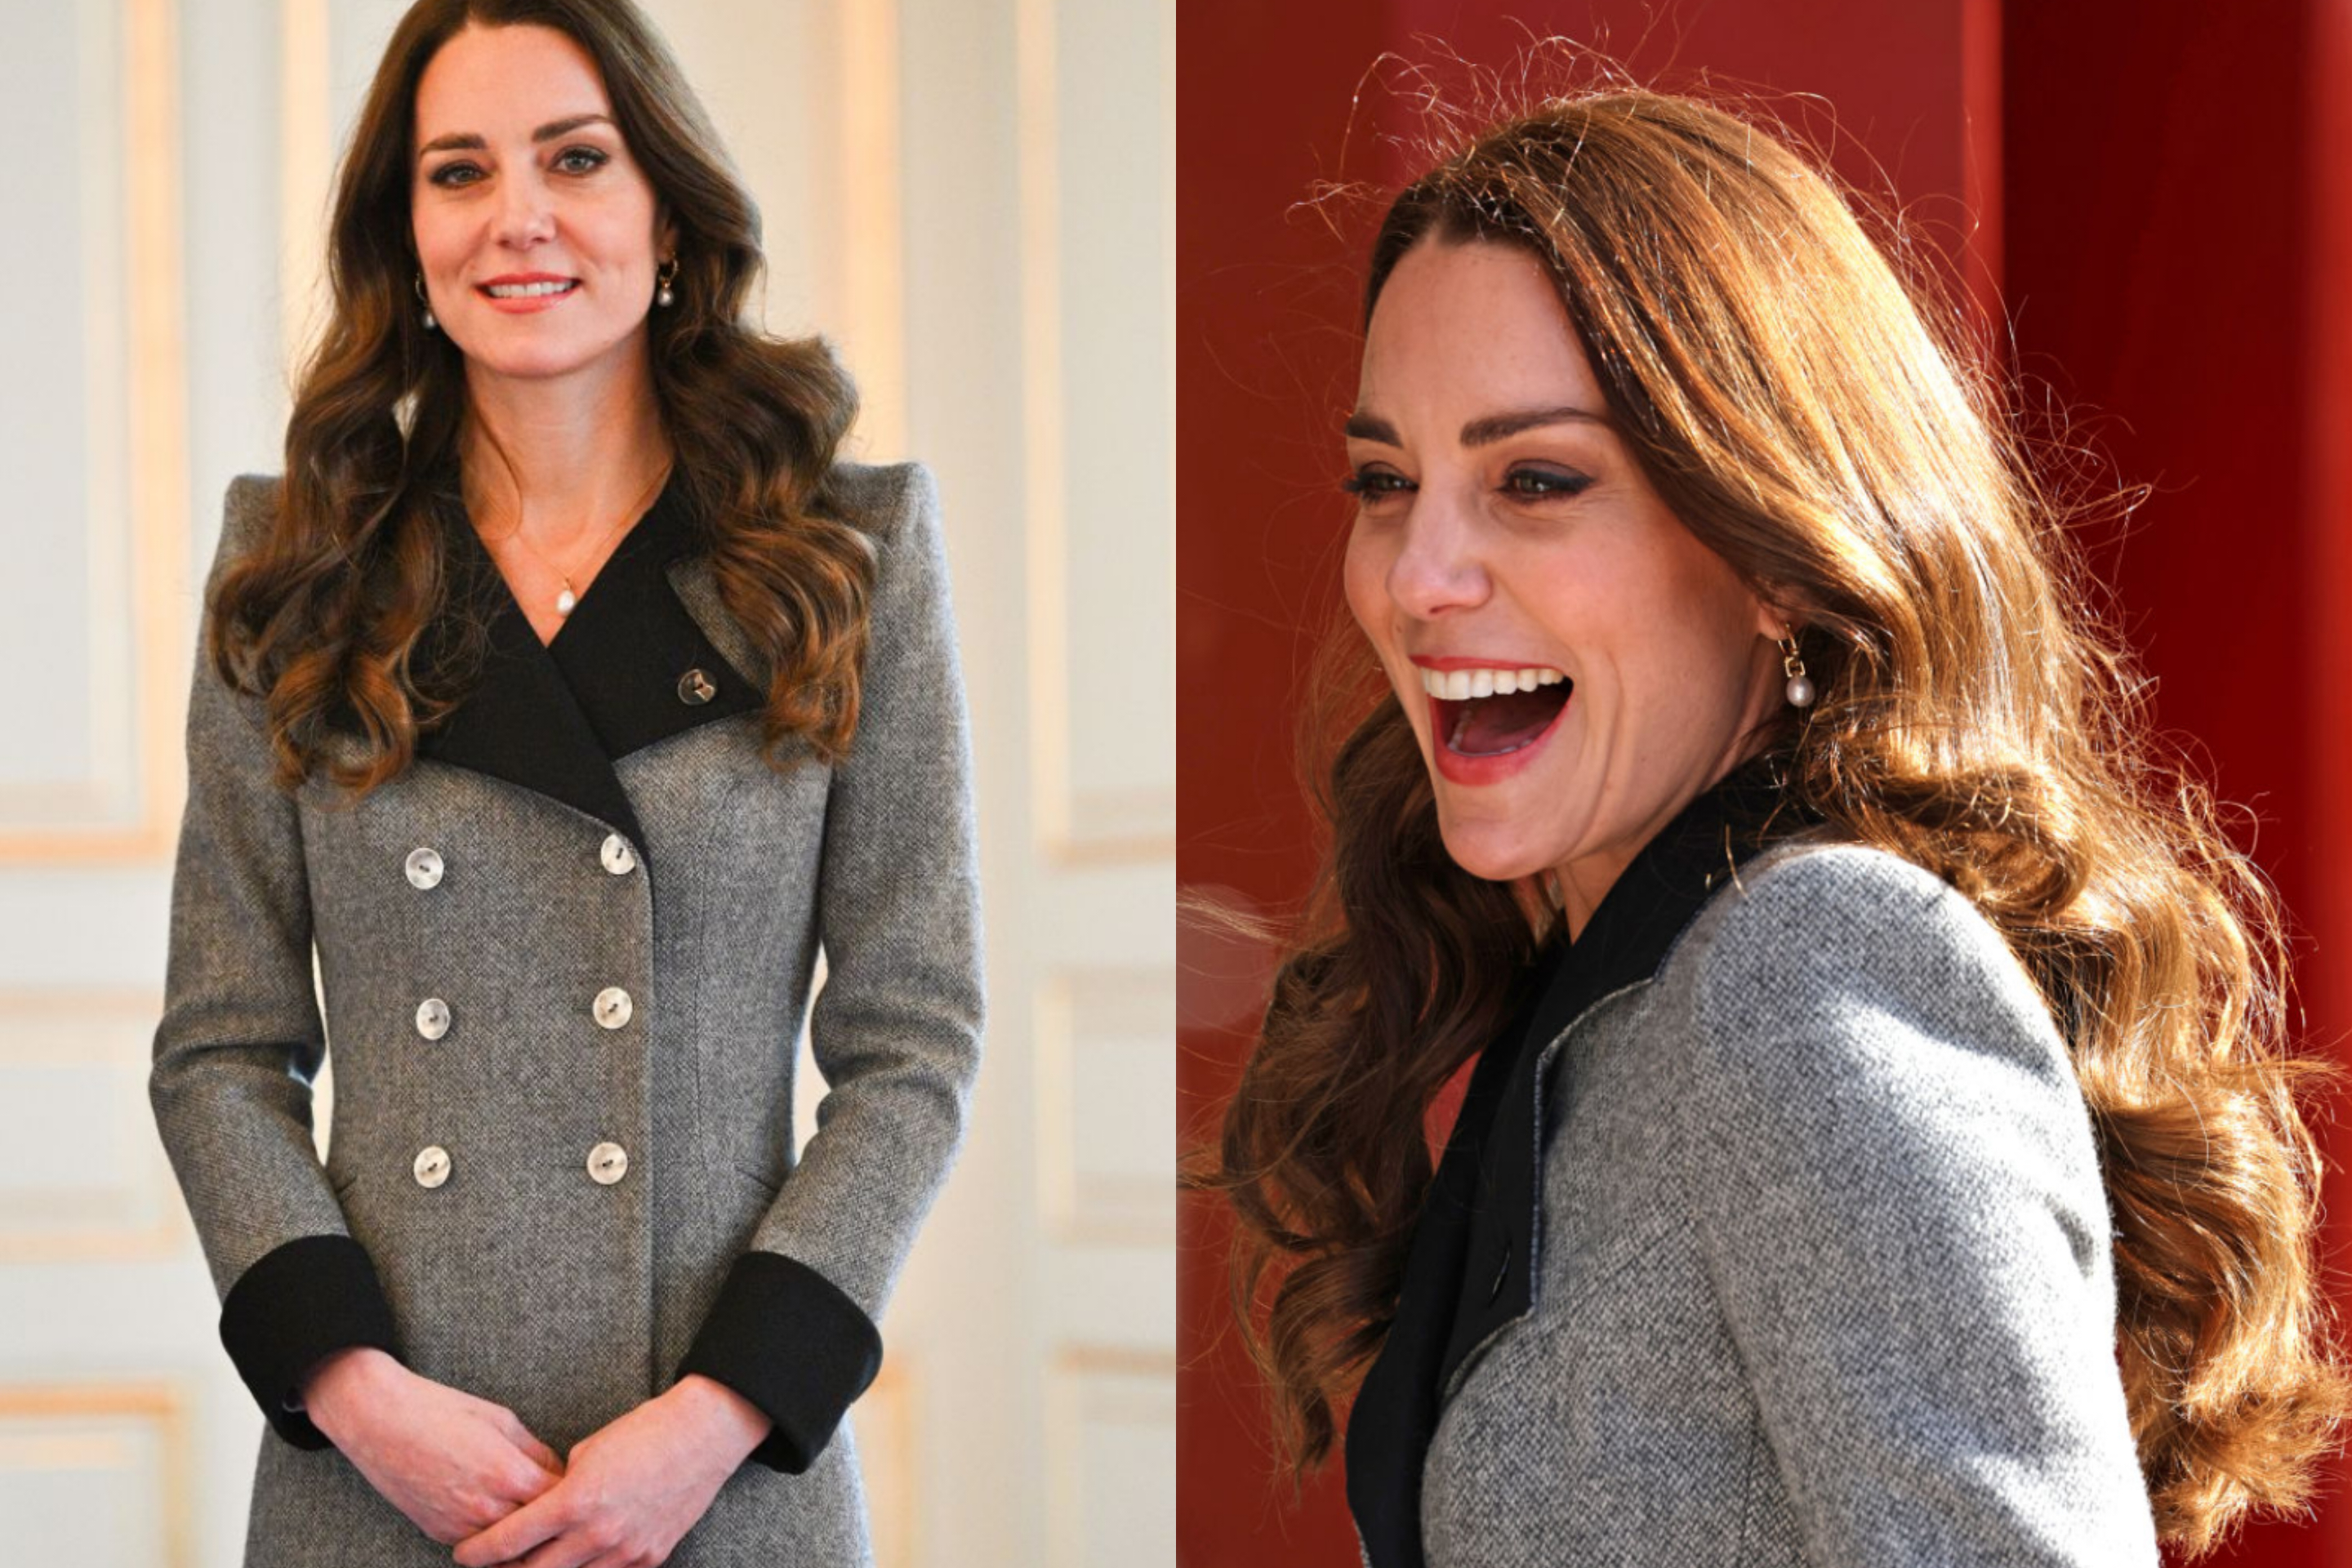 Dead Shattered As Kate Middleton Pictured Smiling Happily